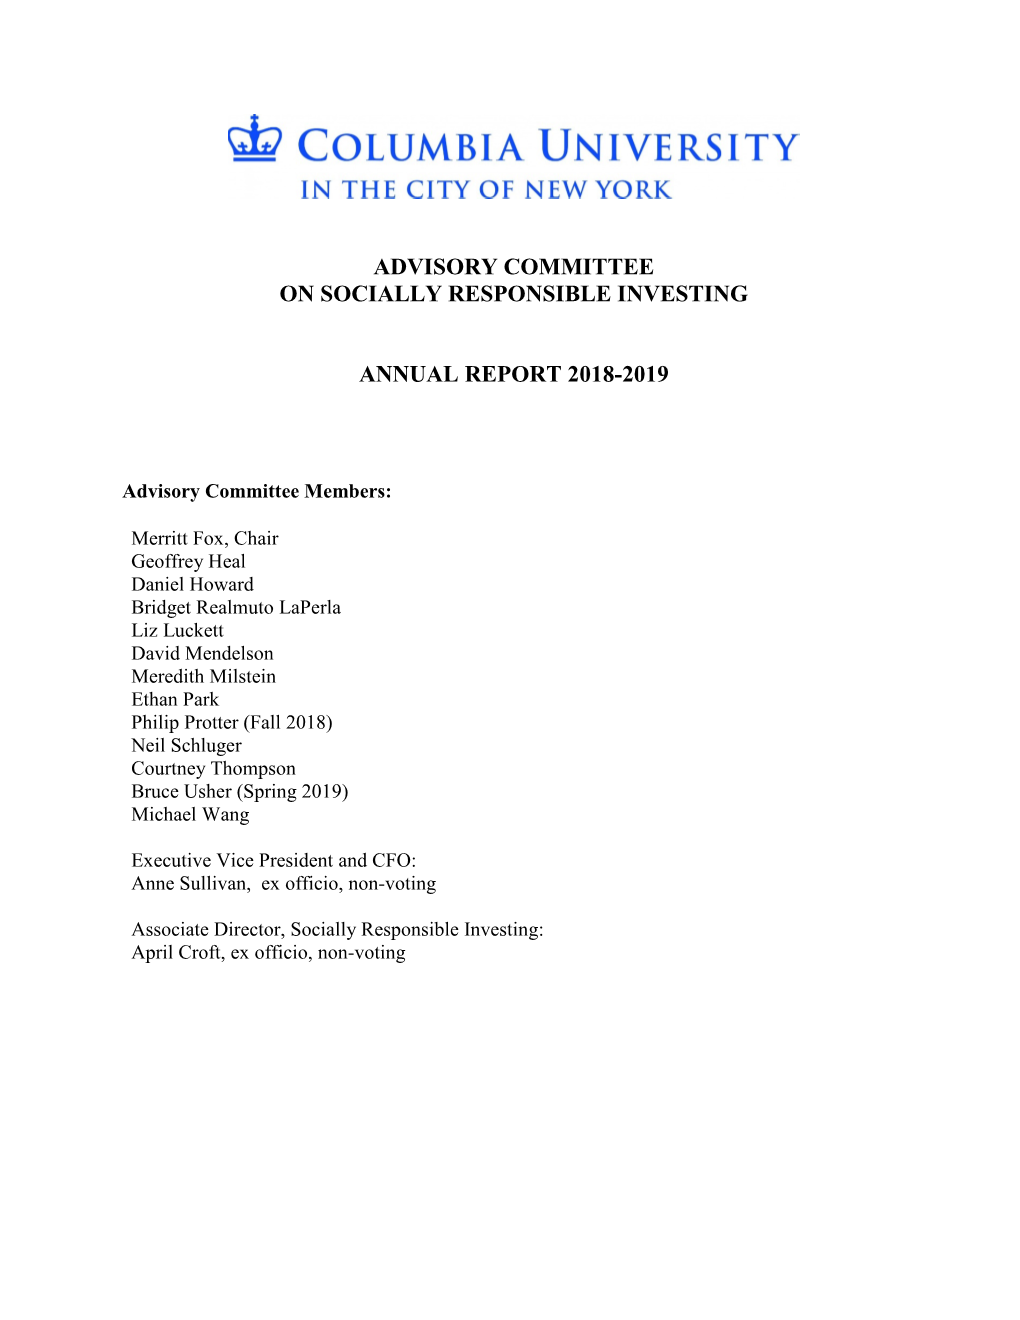 Advisory Committee on Socially Responsible Investing Annual Report